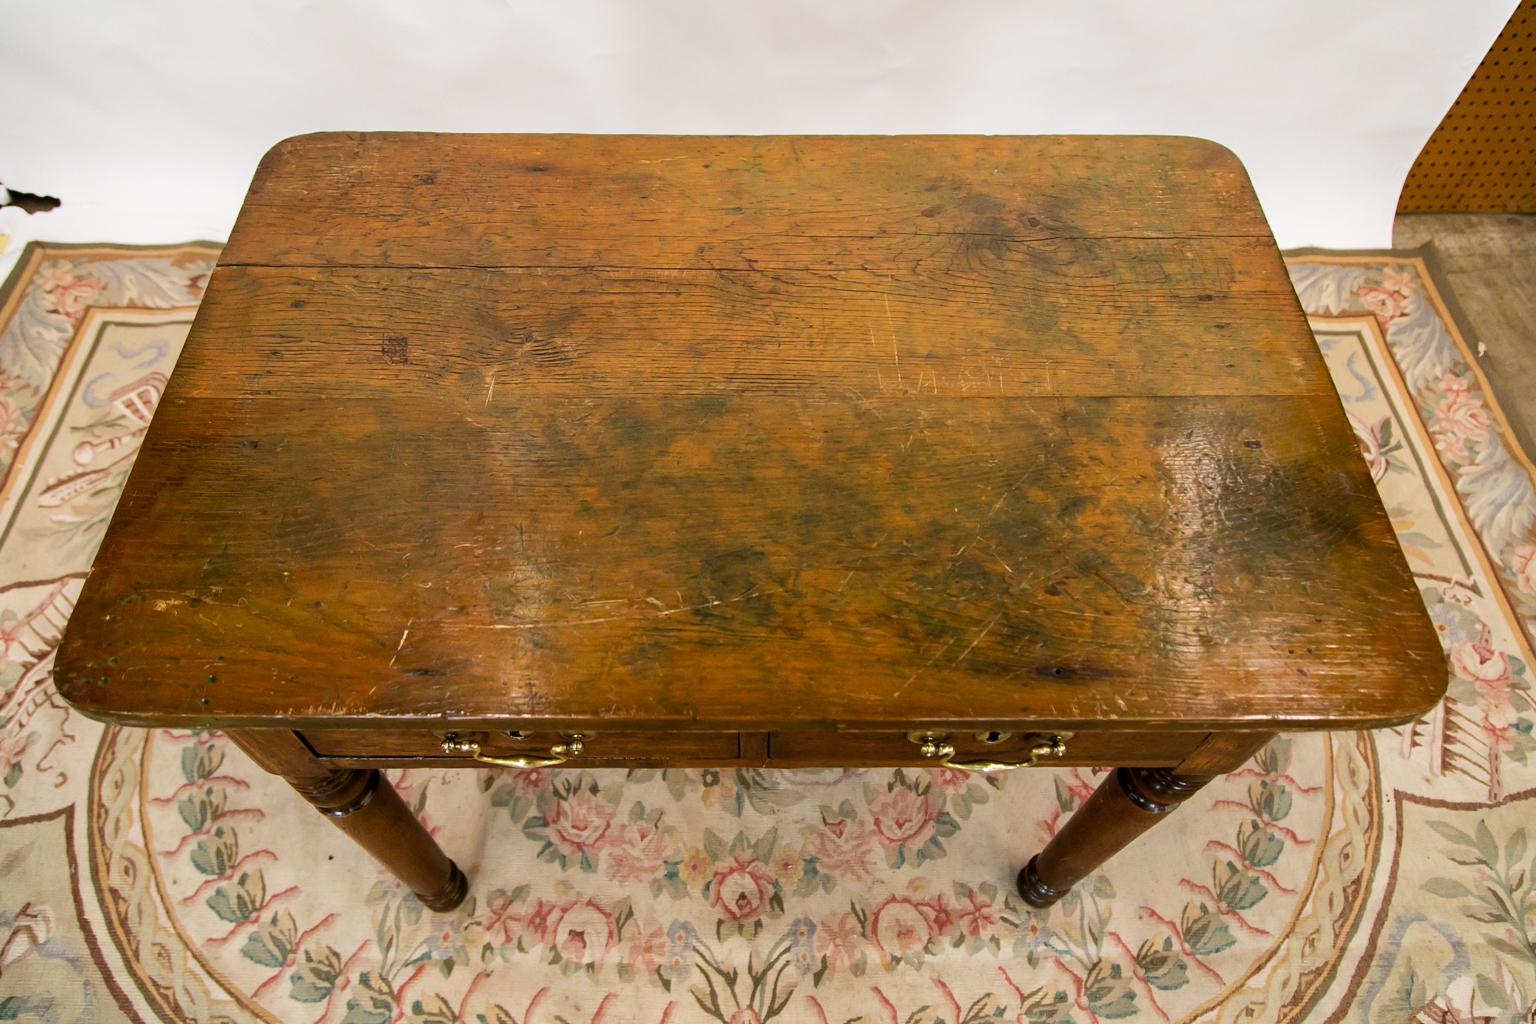 This English side table has shrinkage cracks and some staining to the top patina.